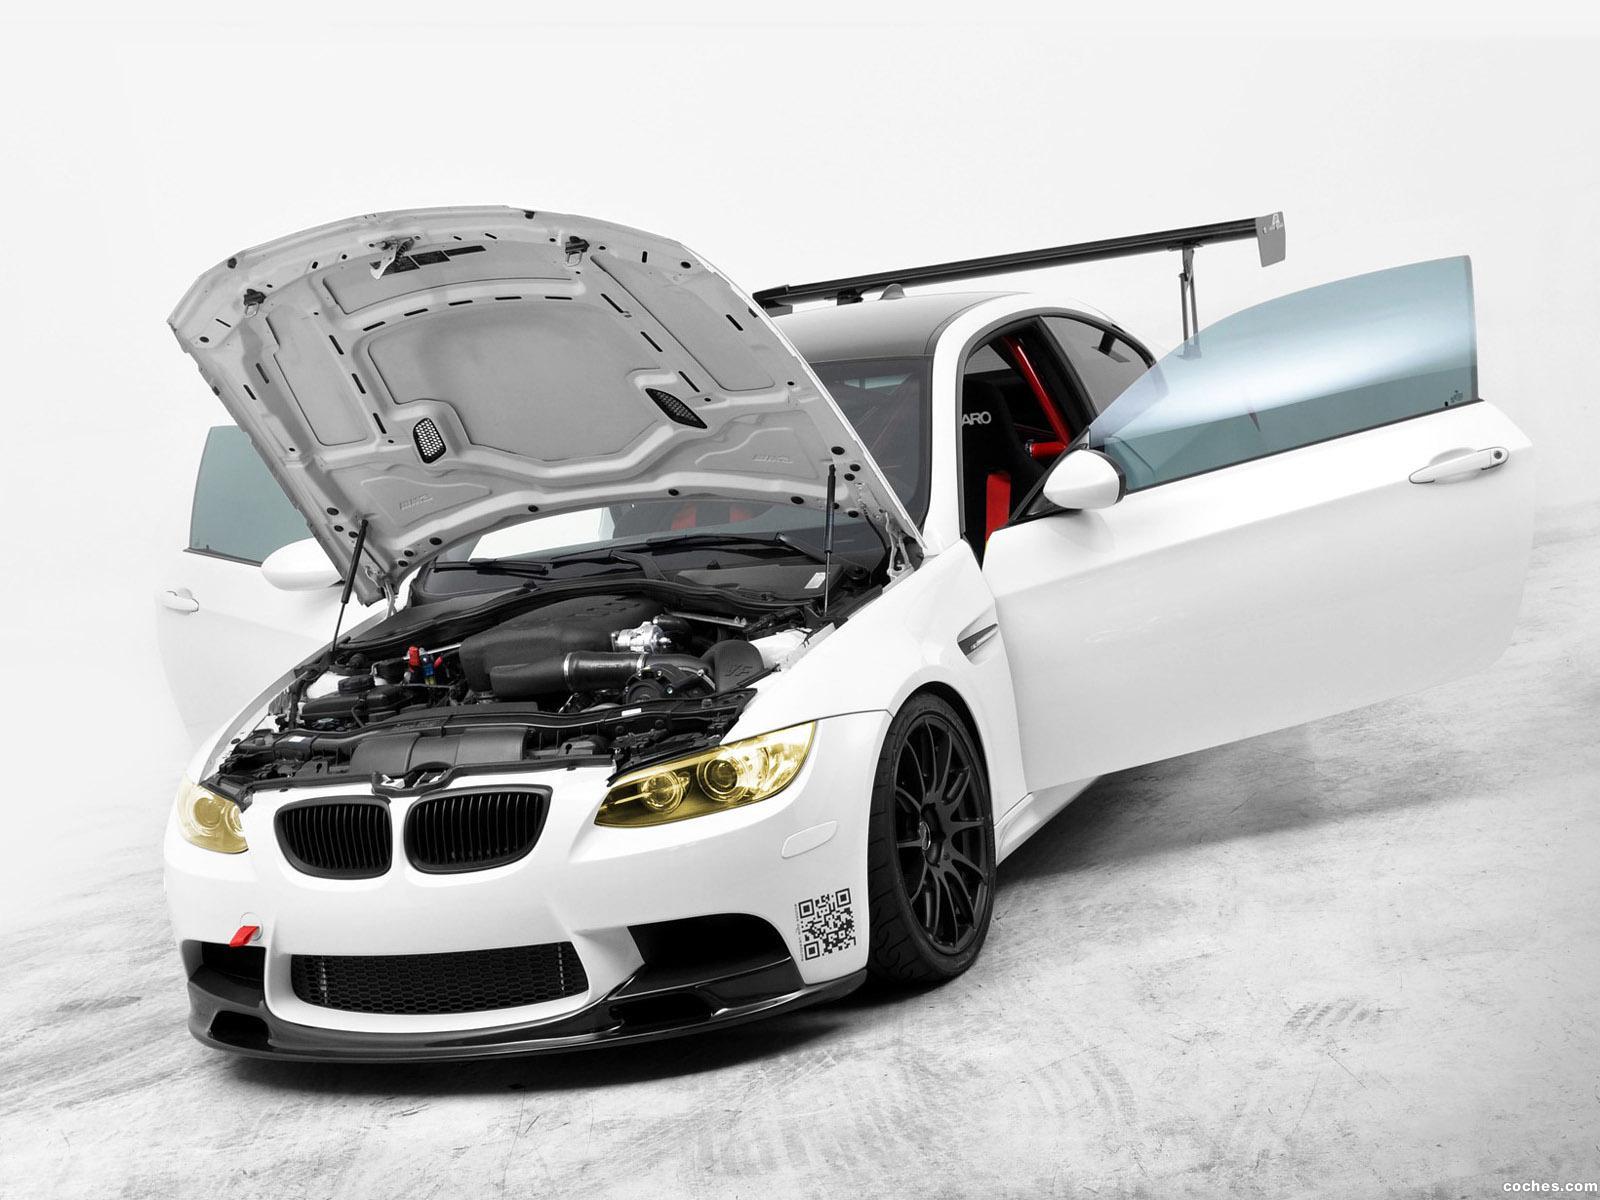 eas_bmw-m3-coupe-vf620-supercharged-e92-2012_r8